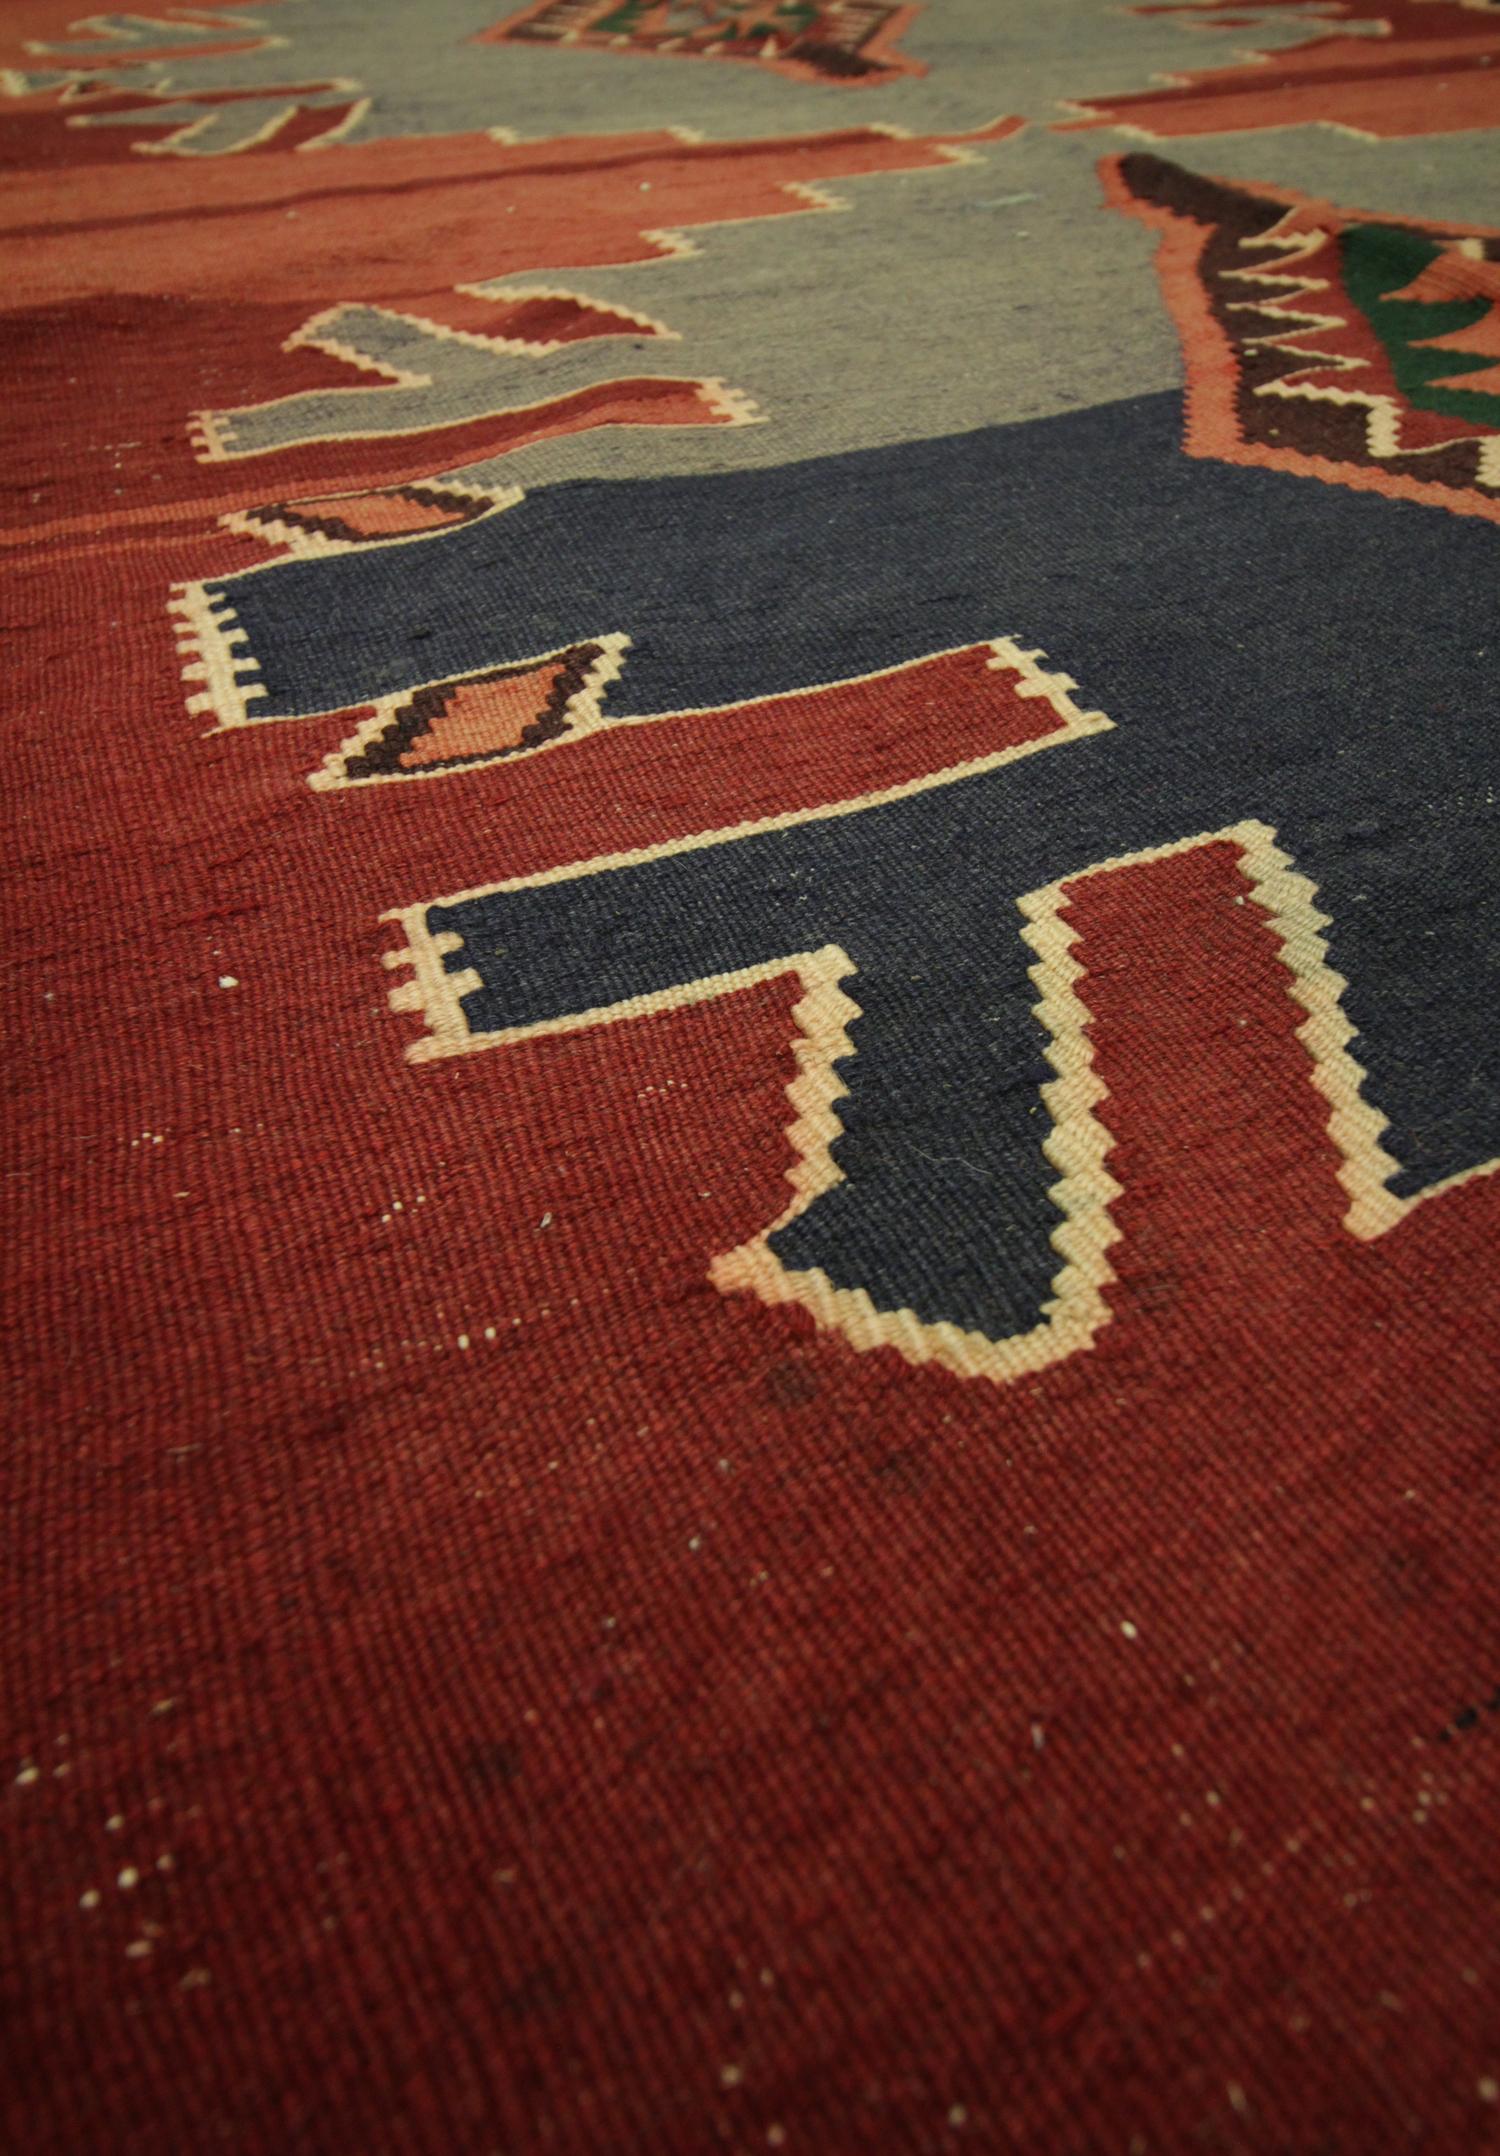 Hand-Knotted Traditional Kilims Tribal Wool Kilim Rug Vintage Red Blue Area Rug For Sale